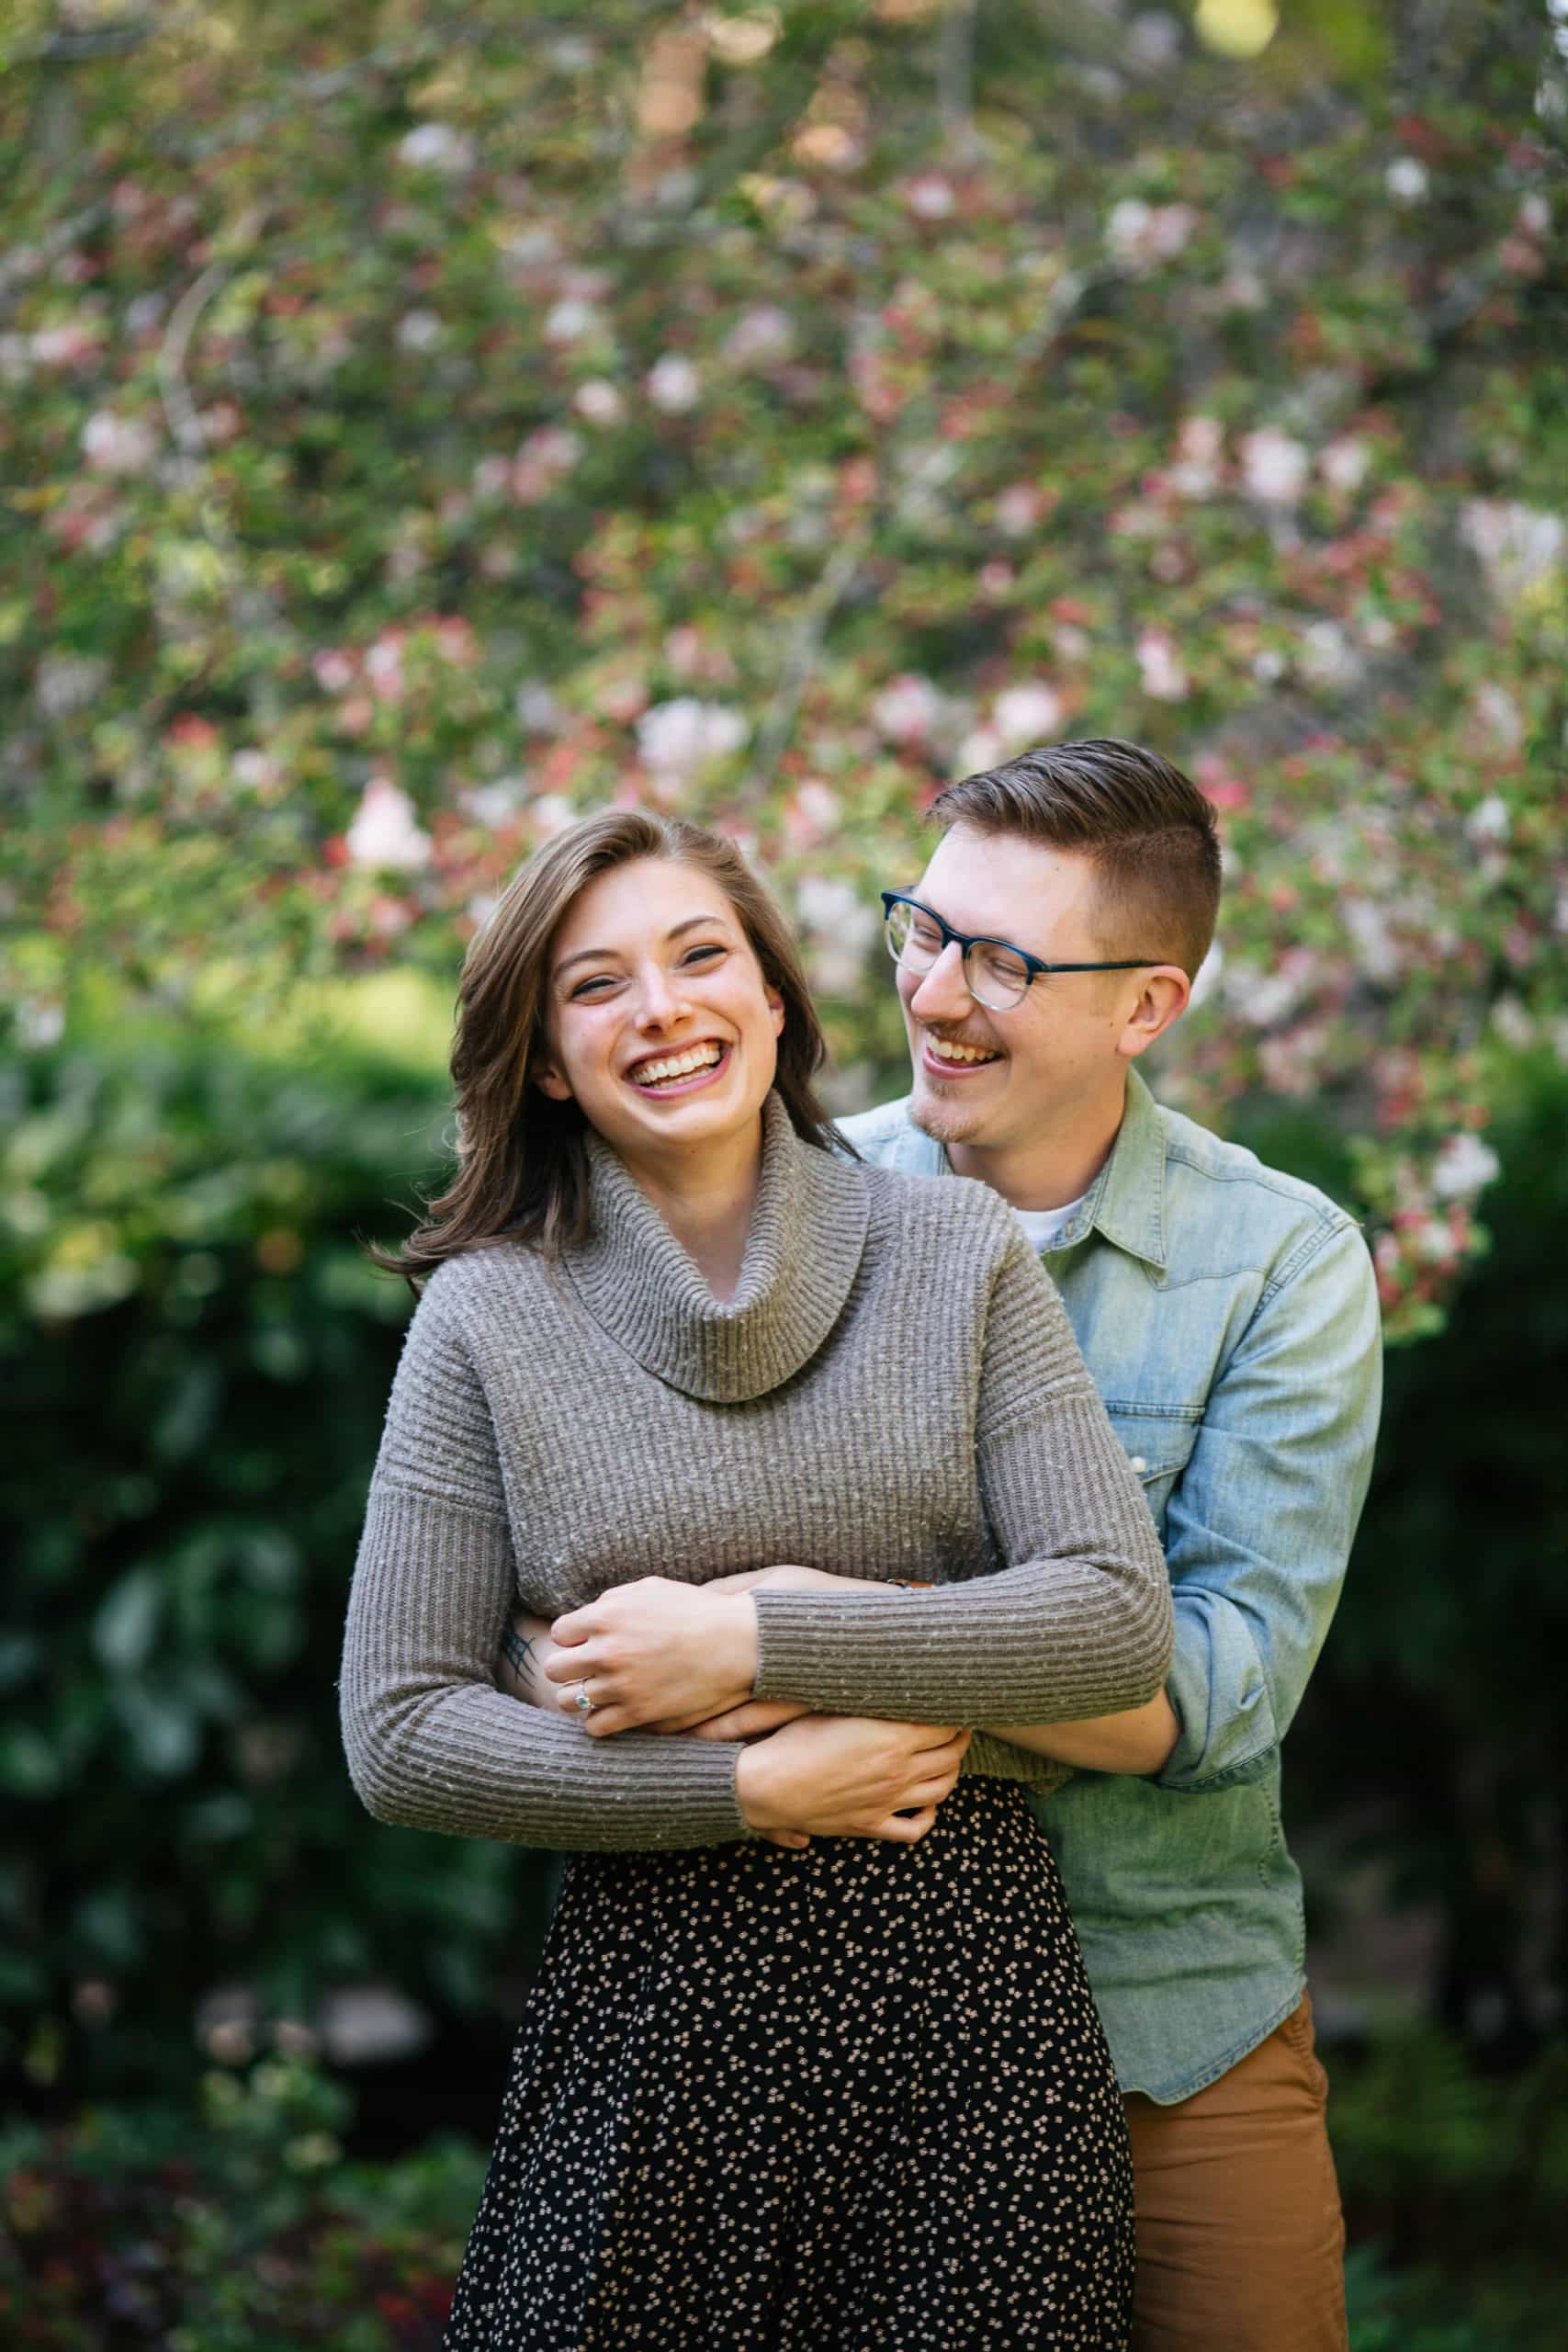 Man standing behind woman with arms around her laughing together in green floral garden